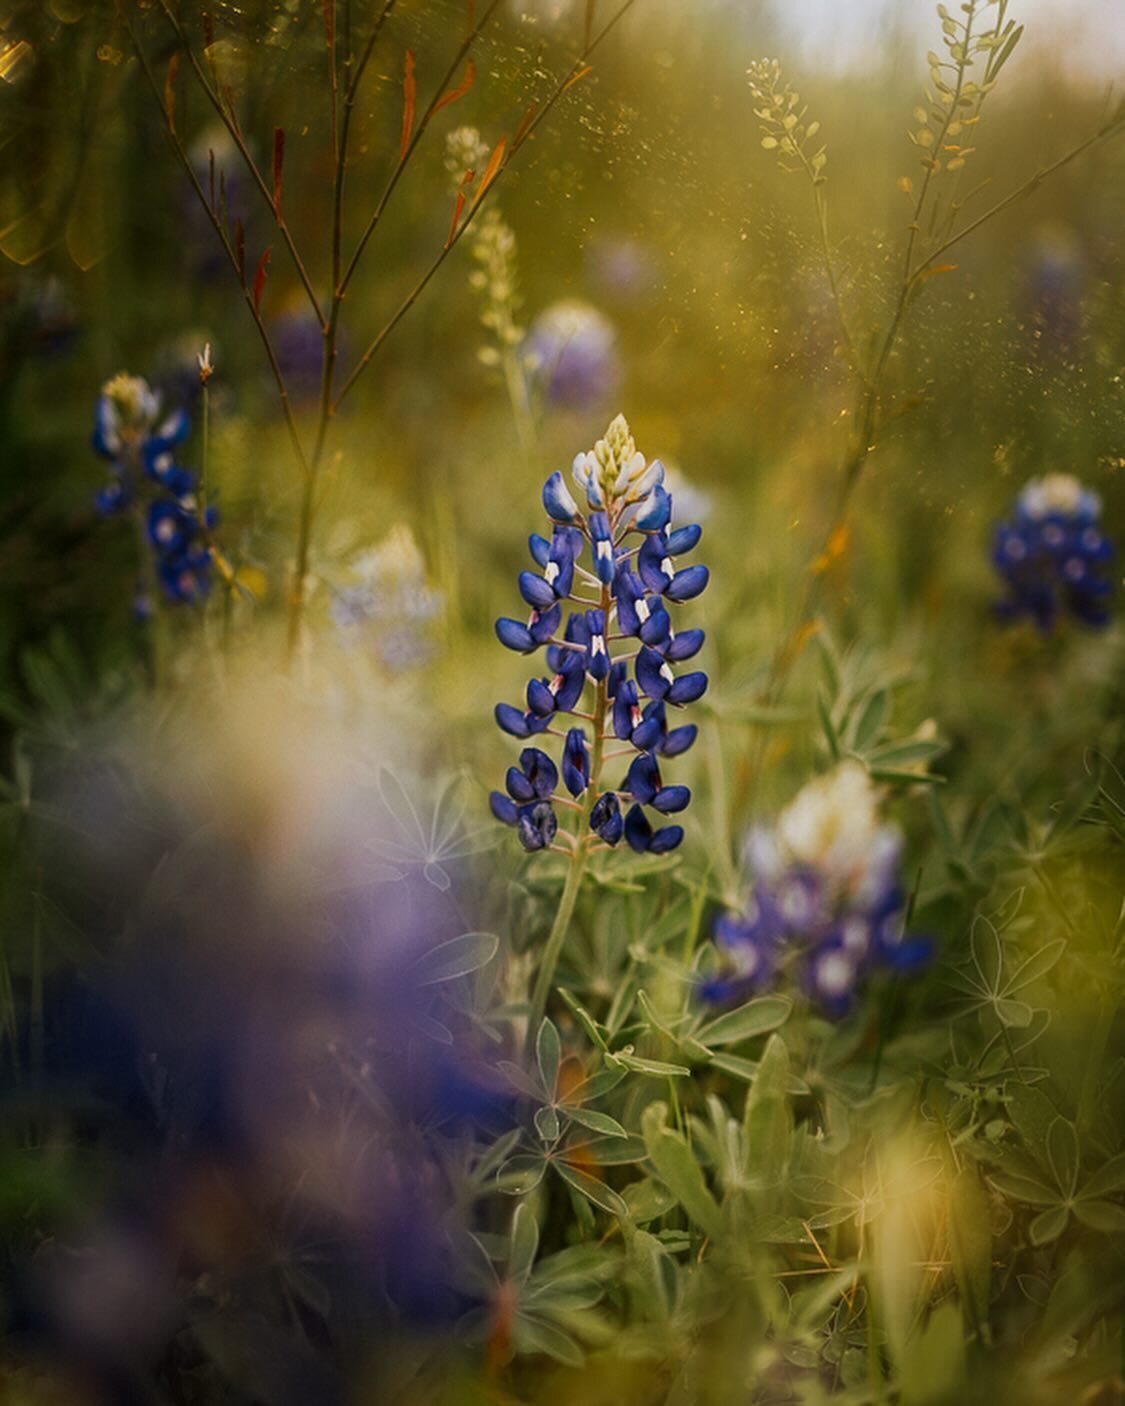 I&rsquo;m still in my Wildflower phase and I guess I&rsquo;ll be for a bit longer. Tomorrow I&rsquo;m heading out in search of wildflower fields, I&rsquo;m hoping to find a good variety! 

&ldquo;The most important thing people did for me was to expo